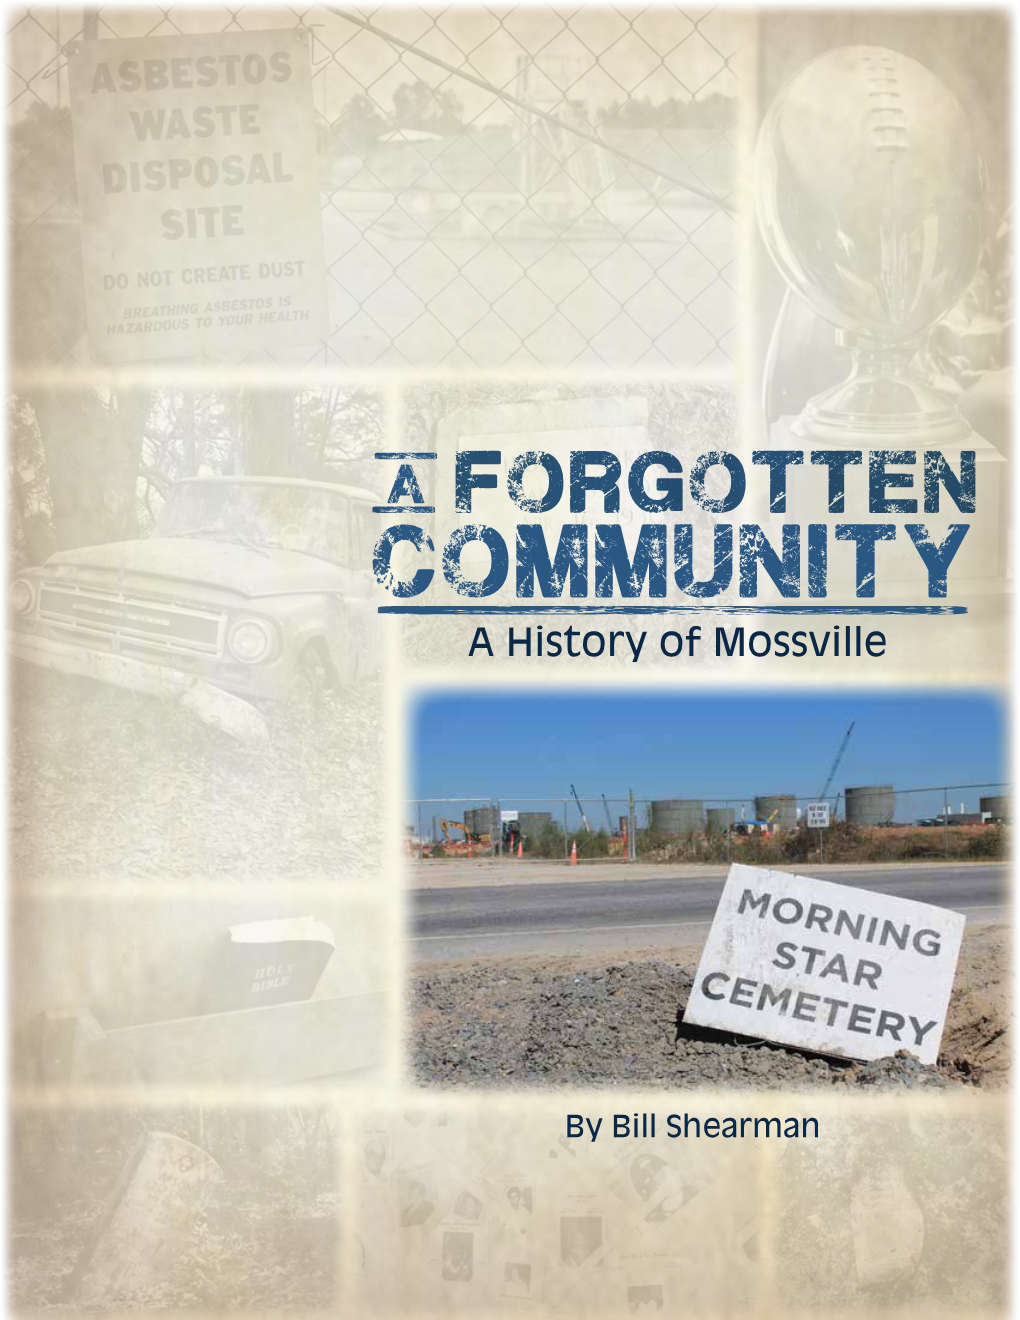 A History of Mossville